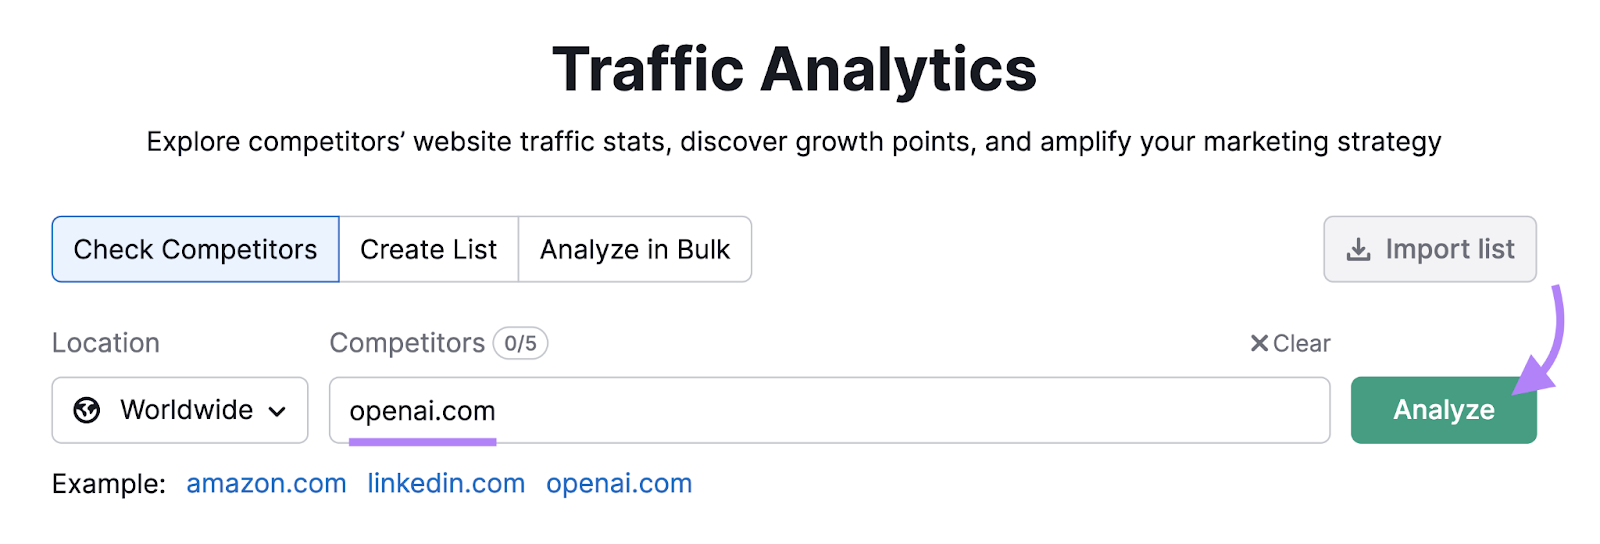 "openai.com" entered into the Traffic Analytics search bar